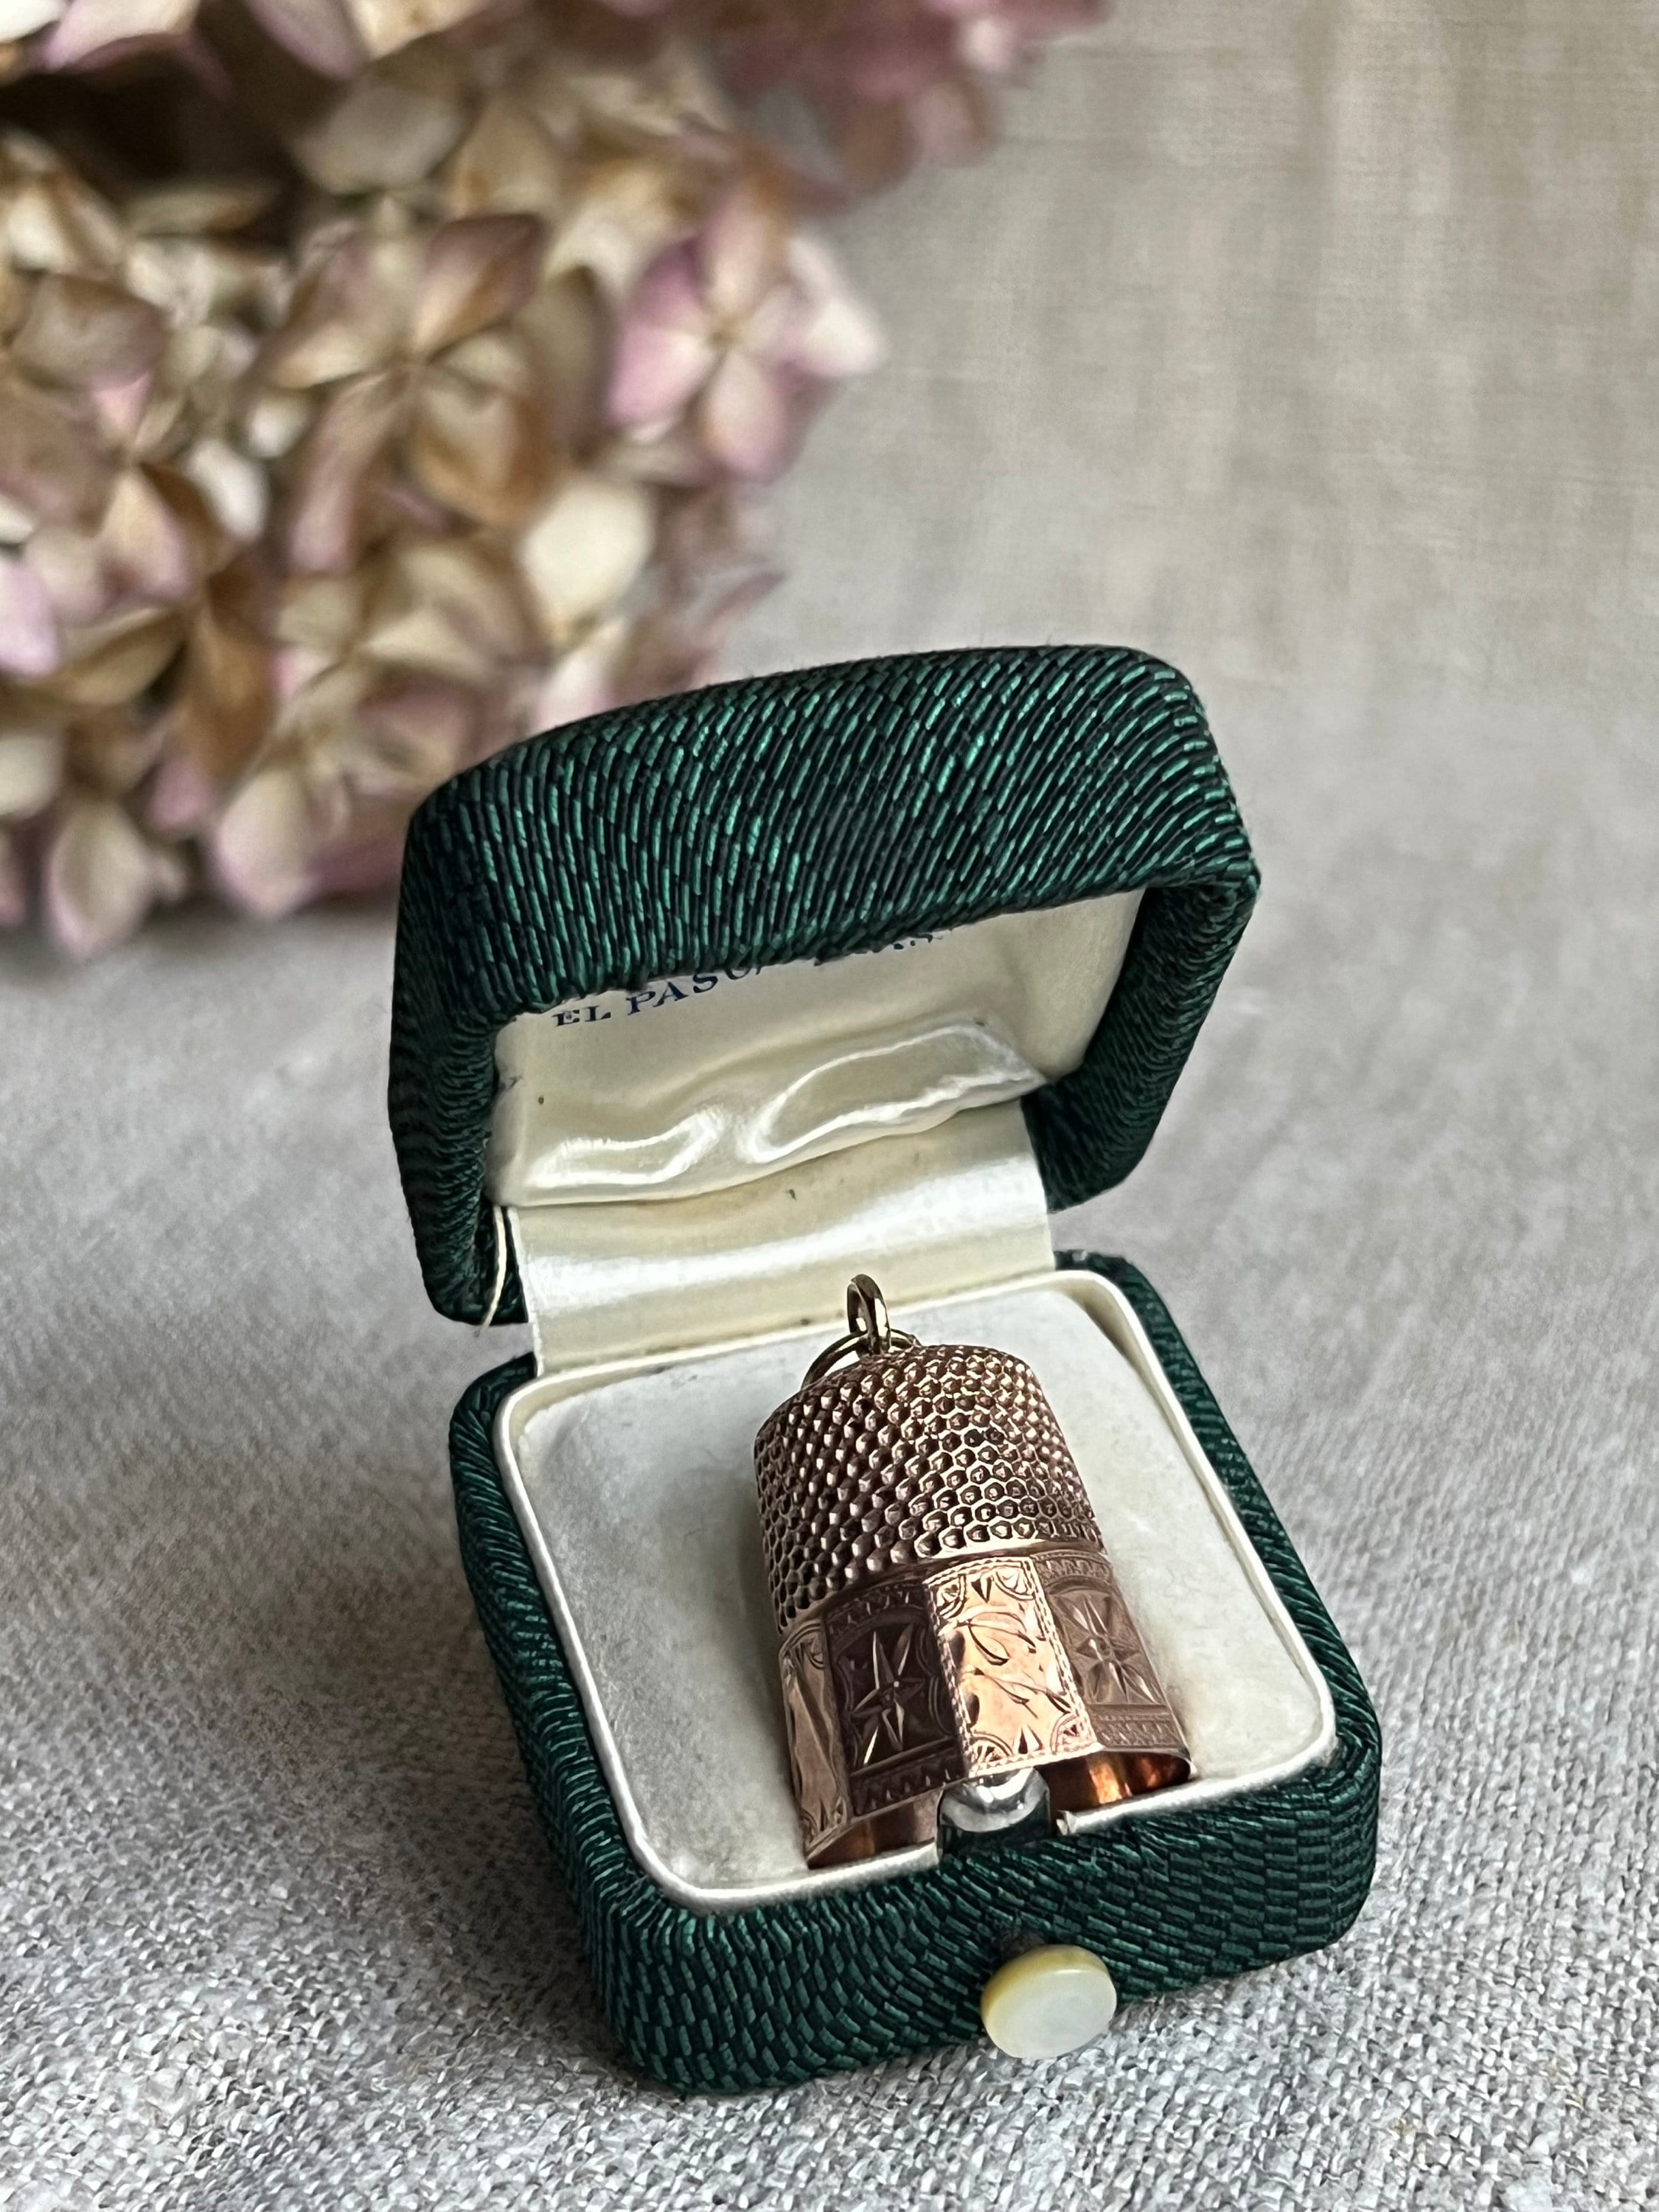 24k Gold Plated Sewing Thimble - THE BEACH PLUM COMPANY